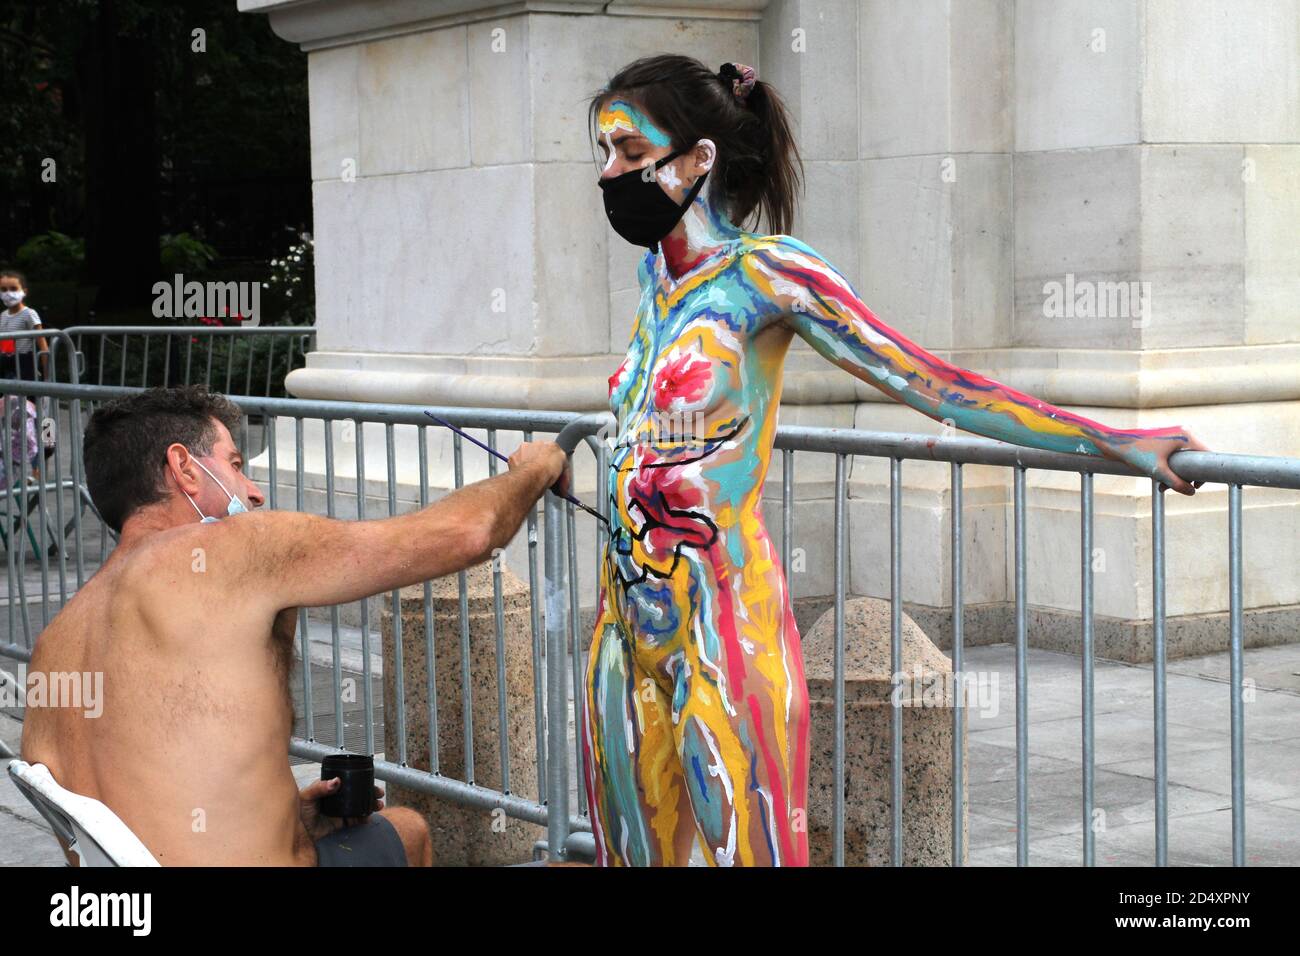 October 10, 2020, New York, New York, USA: Andy Golub founder and Executive Director of Human Connection Arts paints two models near the Washington Square Arch in New York's Greenwich Village neighborhood. (Credit Image: © Bruce Cotler/ZUMA Wire) Stock Photo